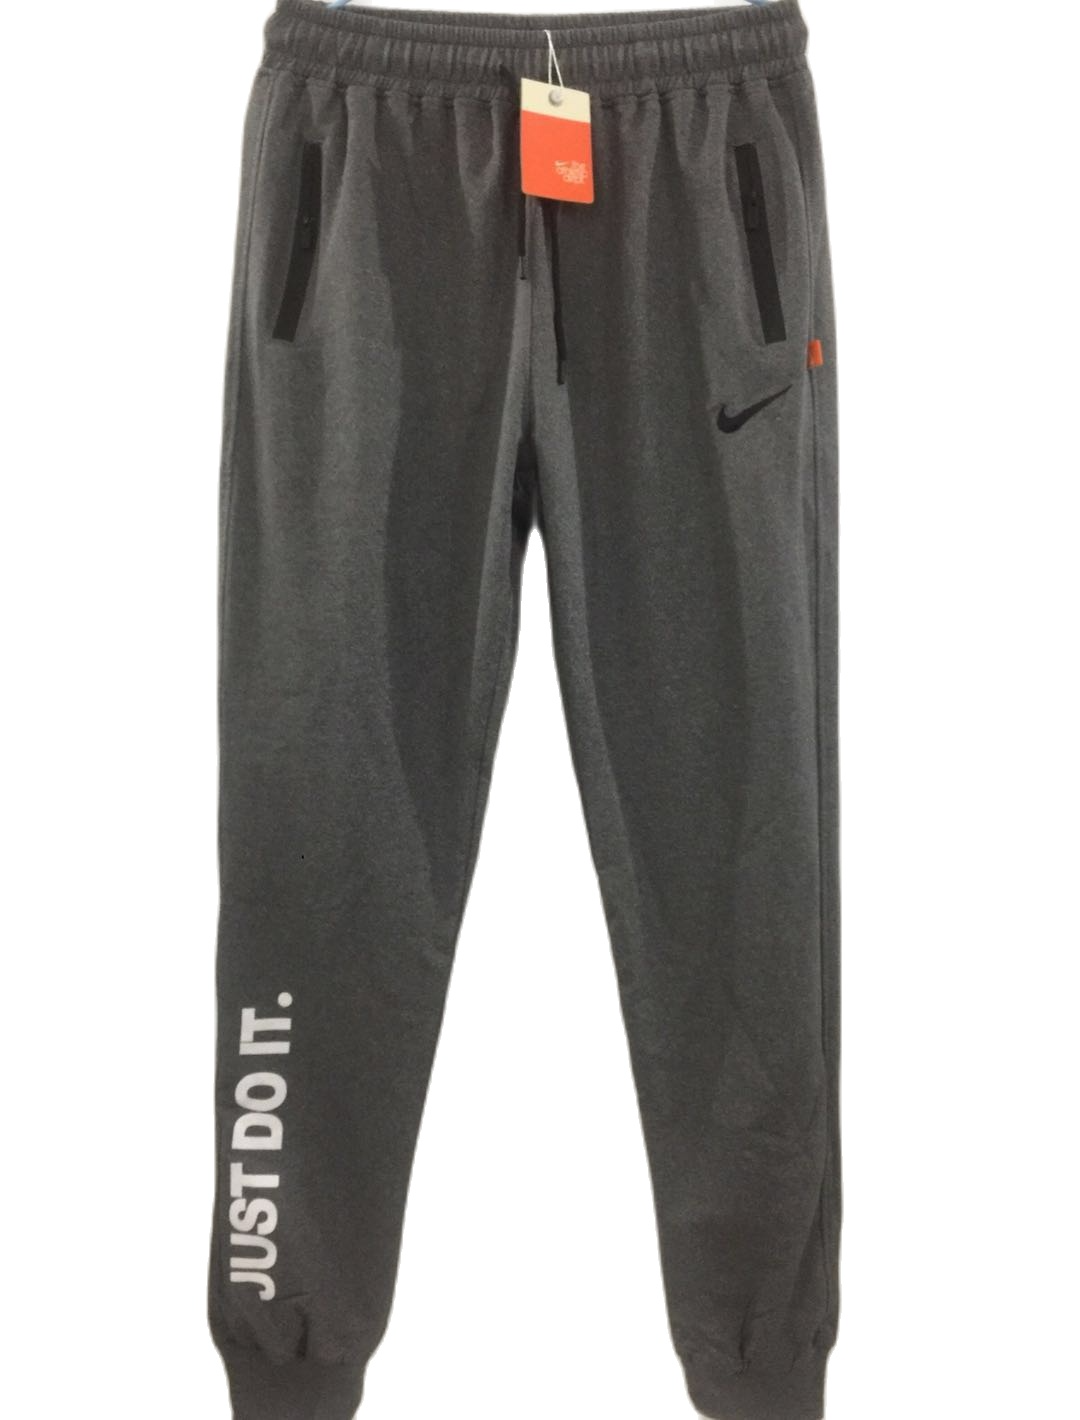 NIKE men's pants 2020 new running training and fitness pants in autumn wear-resistant comfortable casual knitting closed leg pants